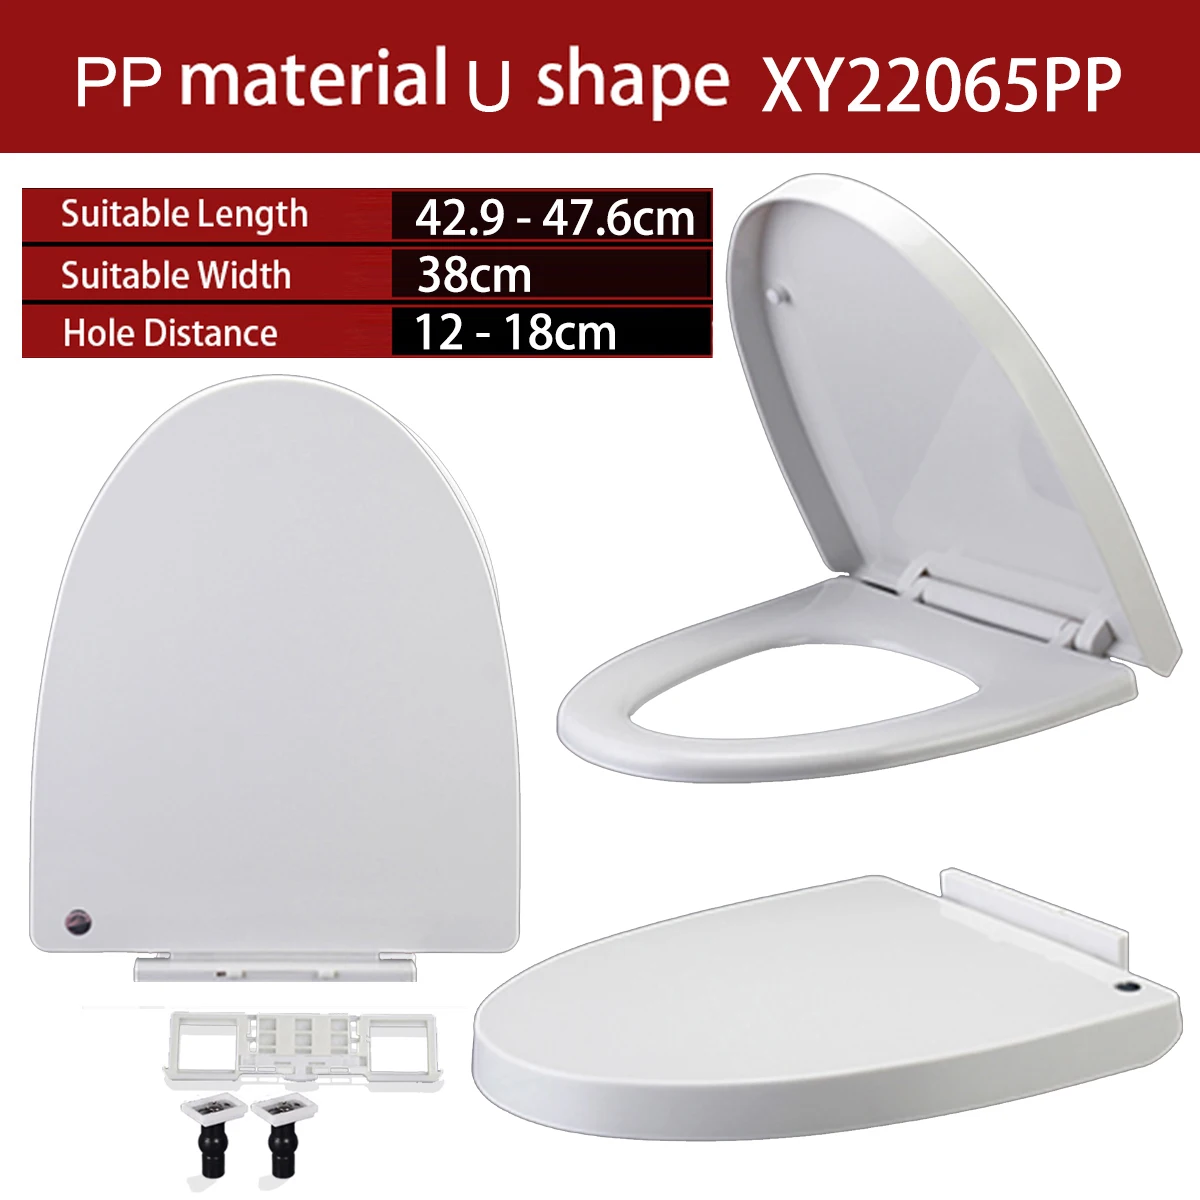 

Universal V Shape Elongated Slow Close WC Toilet Seats Cover Bowl Lid Top Mounted Quick Release PP Board Soft Closure XY22065PP